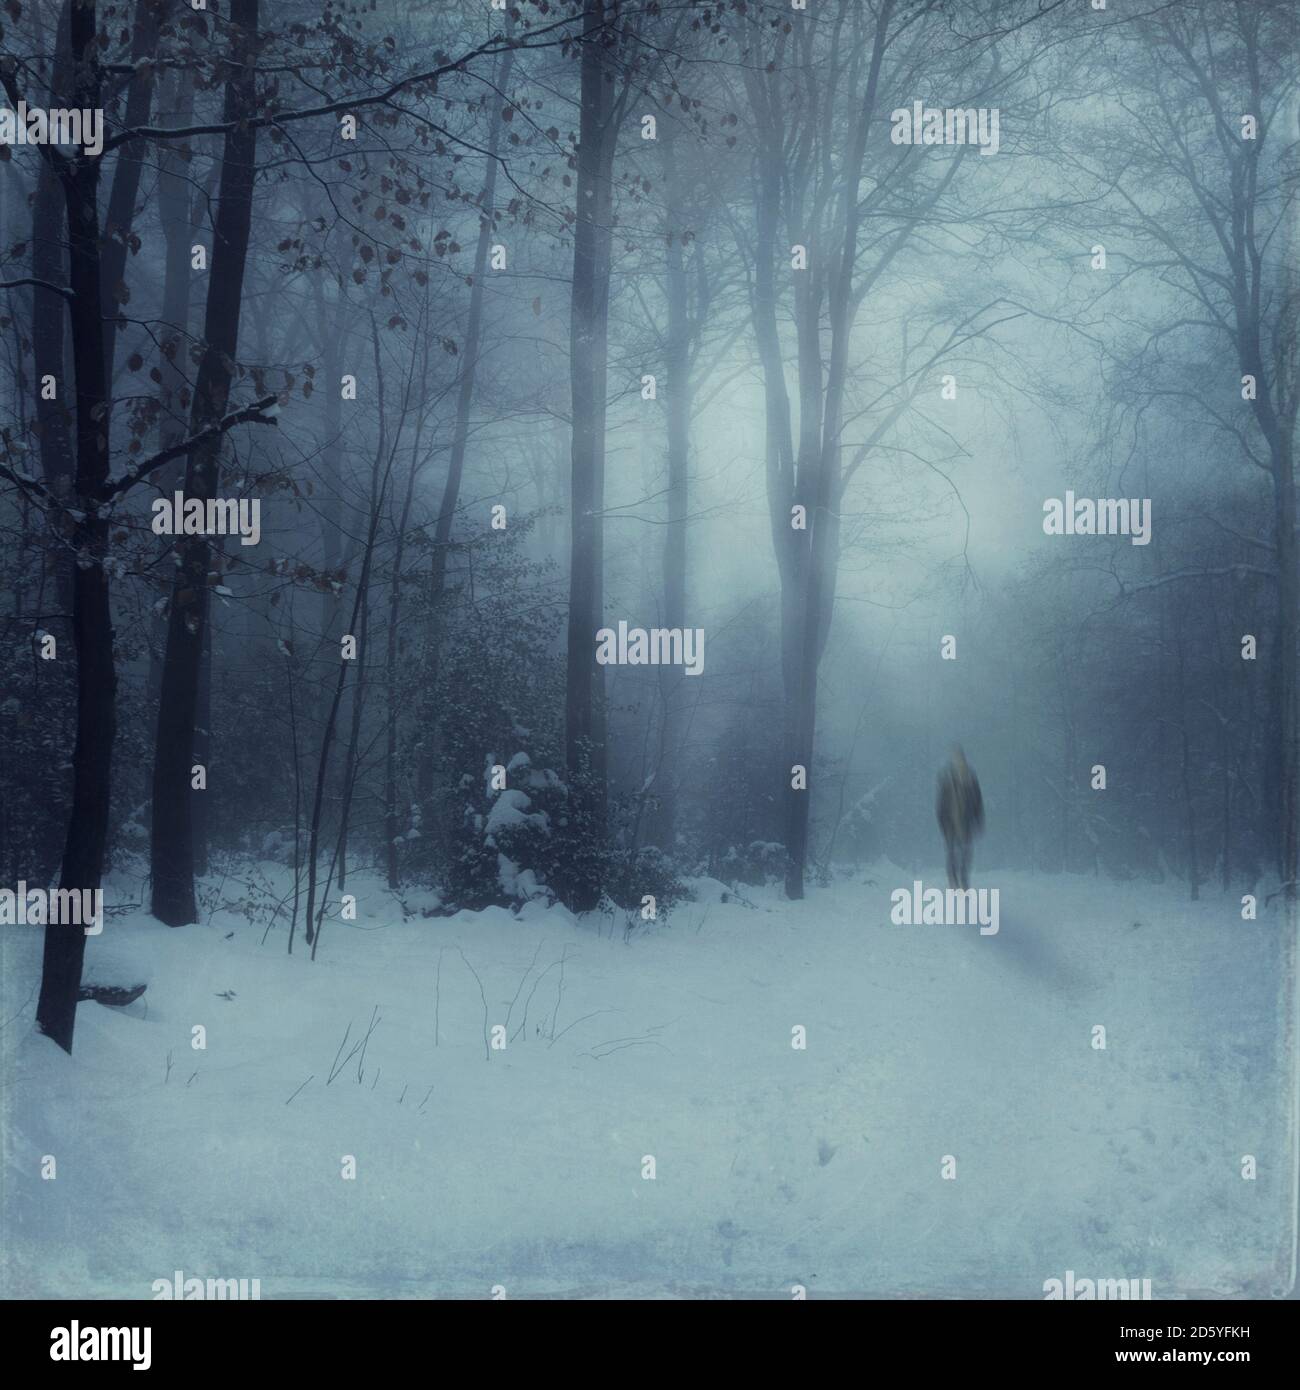 Germany, near Wuppertal, Man walking in snow covered forest, digital manipulation Stock Photo